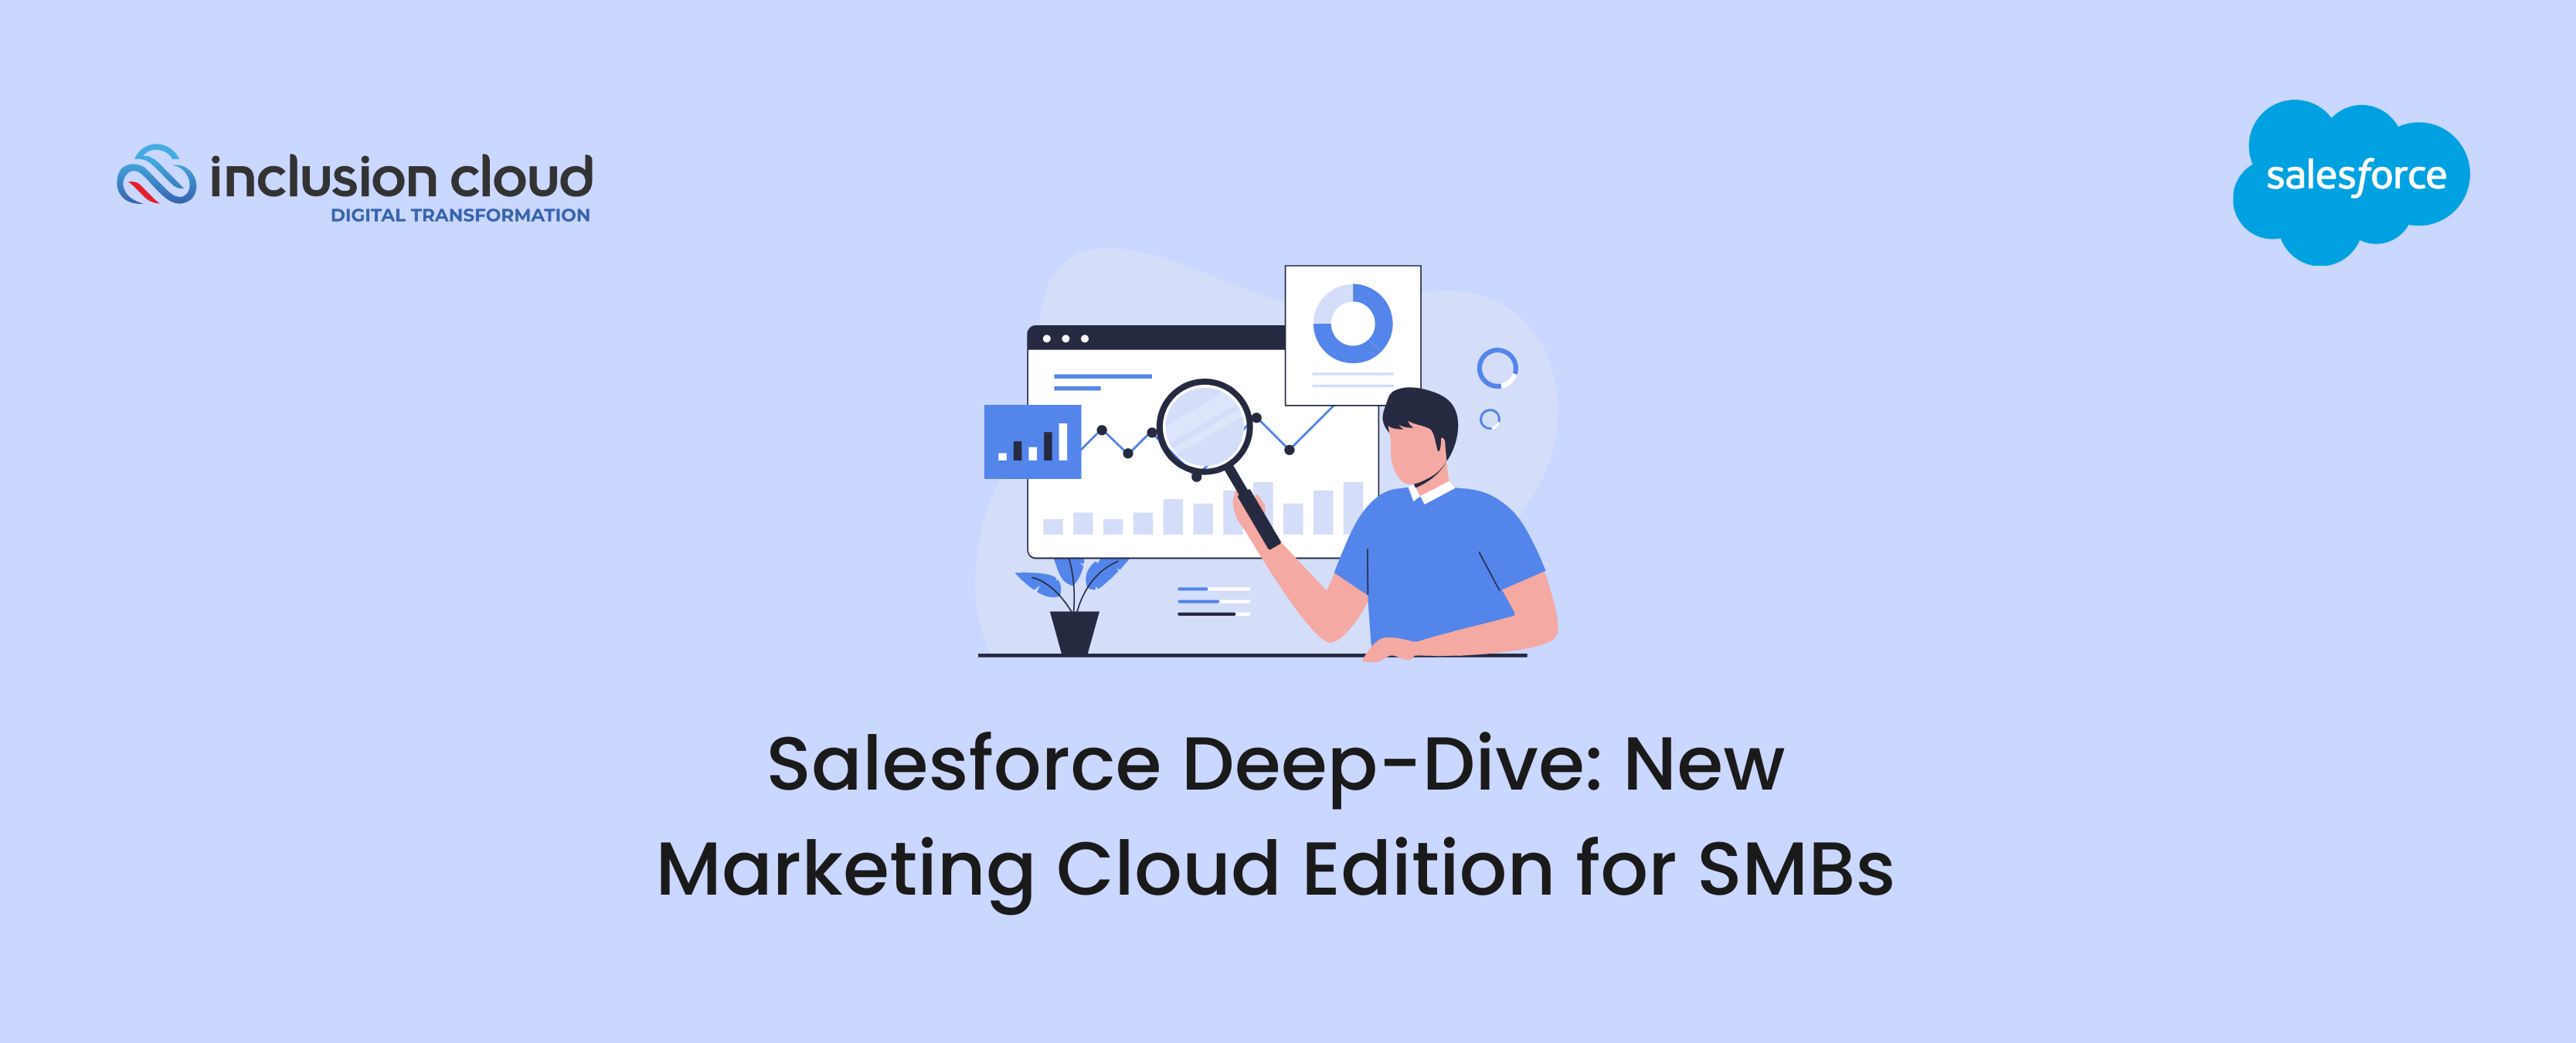 Salesforce Deep-Dive: New Marketing Cloud Edition for SMBs